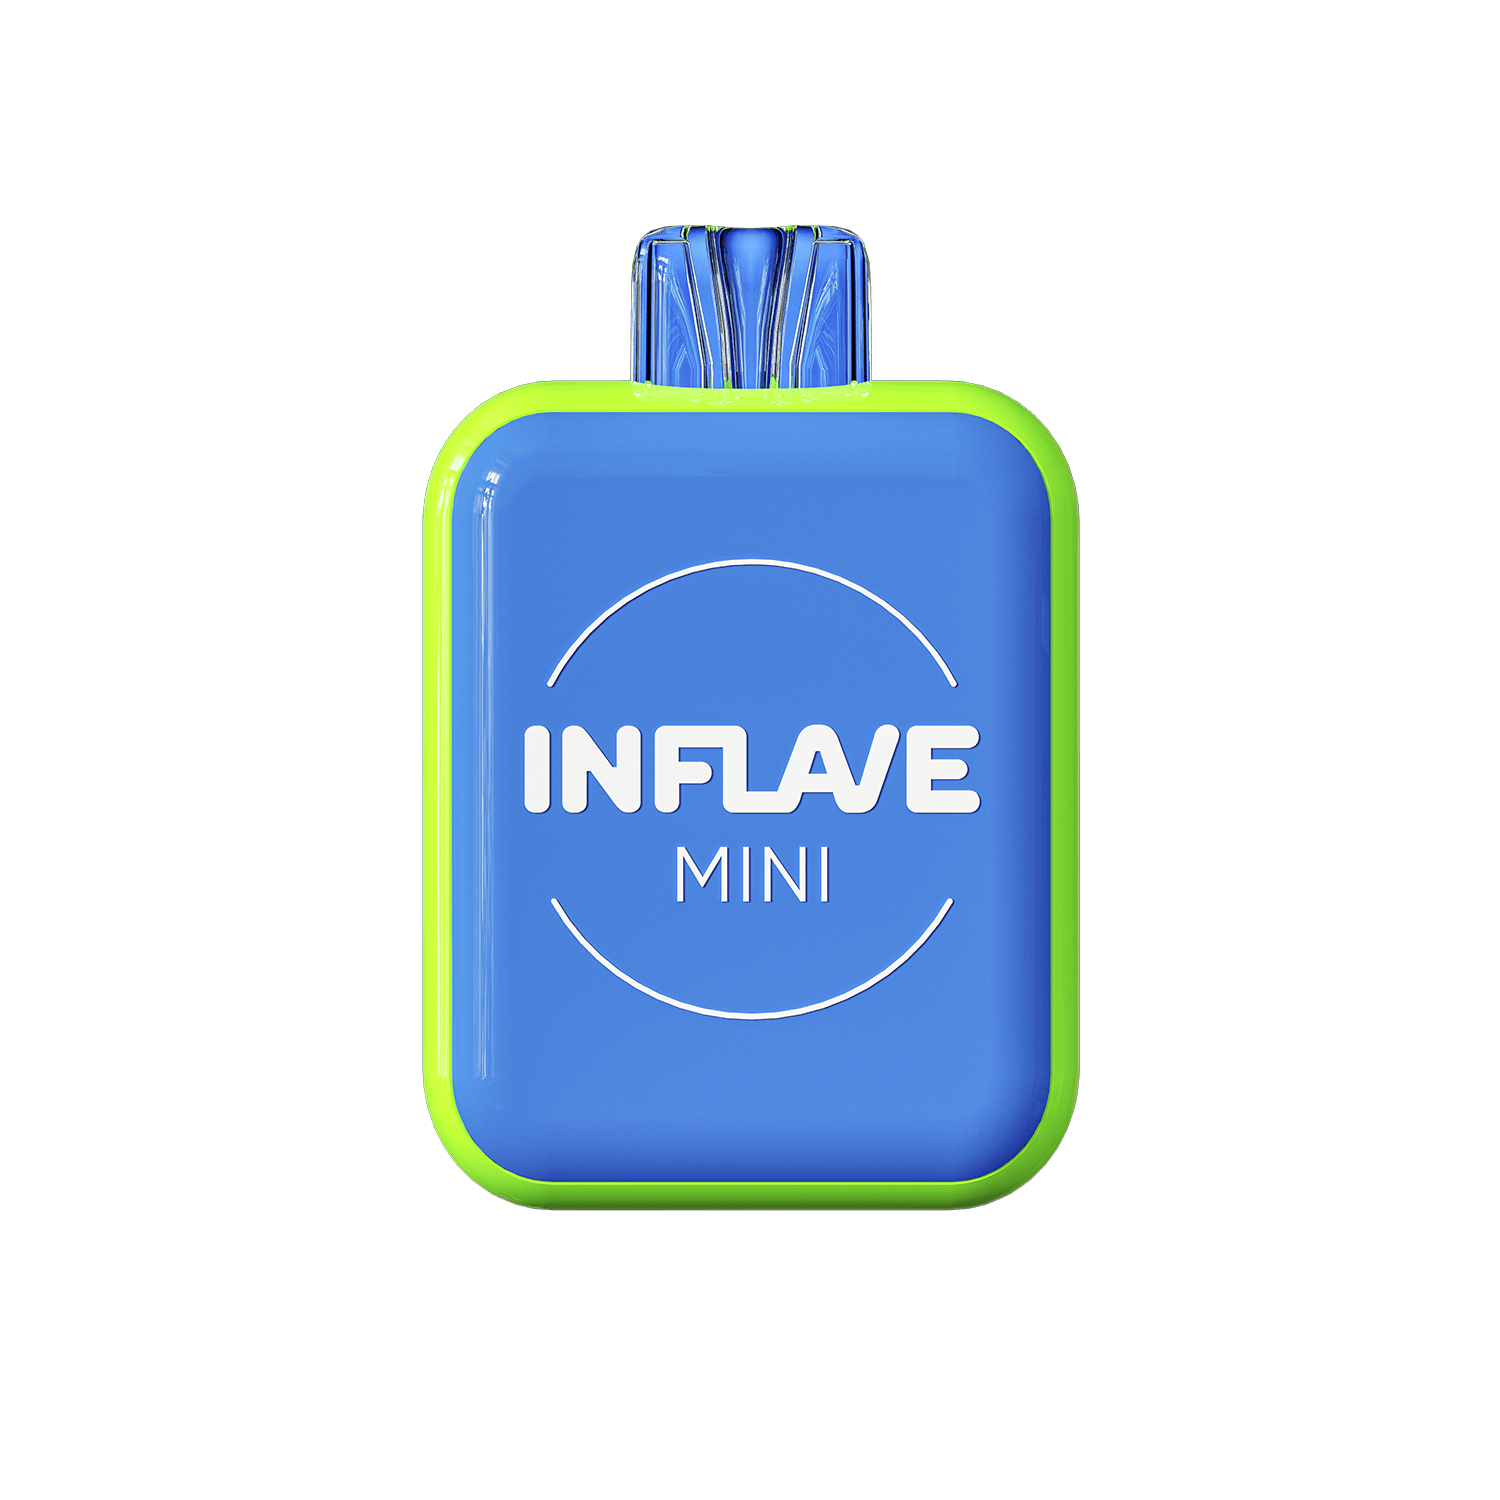 Inflave Mini. Inflave Mini 1000 яблоко \ лайм \ мята. Inflave 1000. Inflave Mini одноразки. Inflave spin